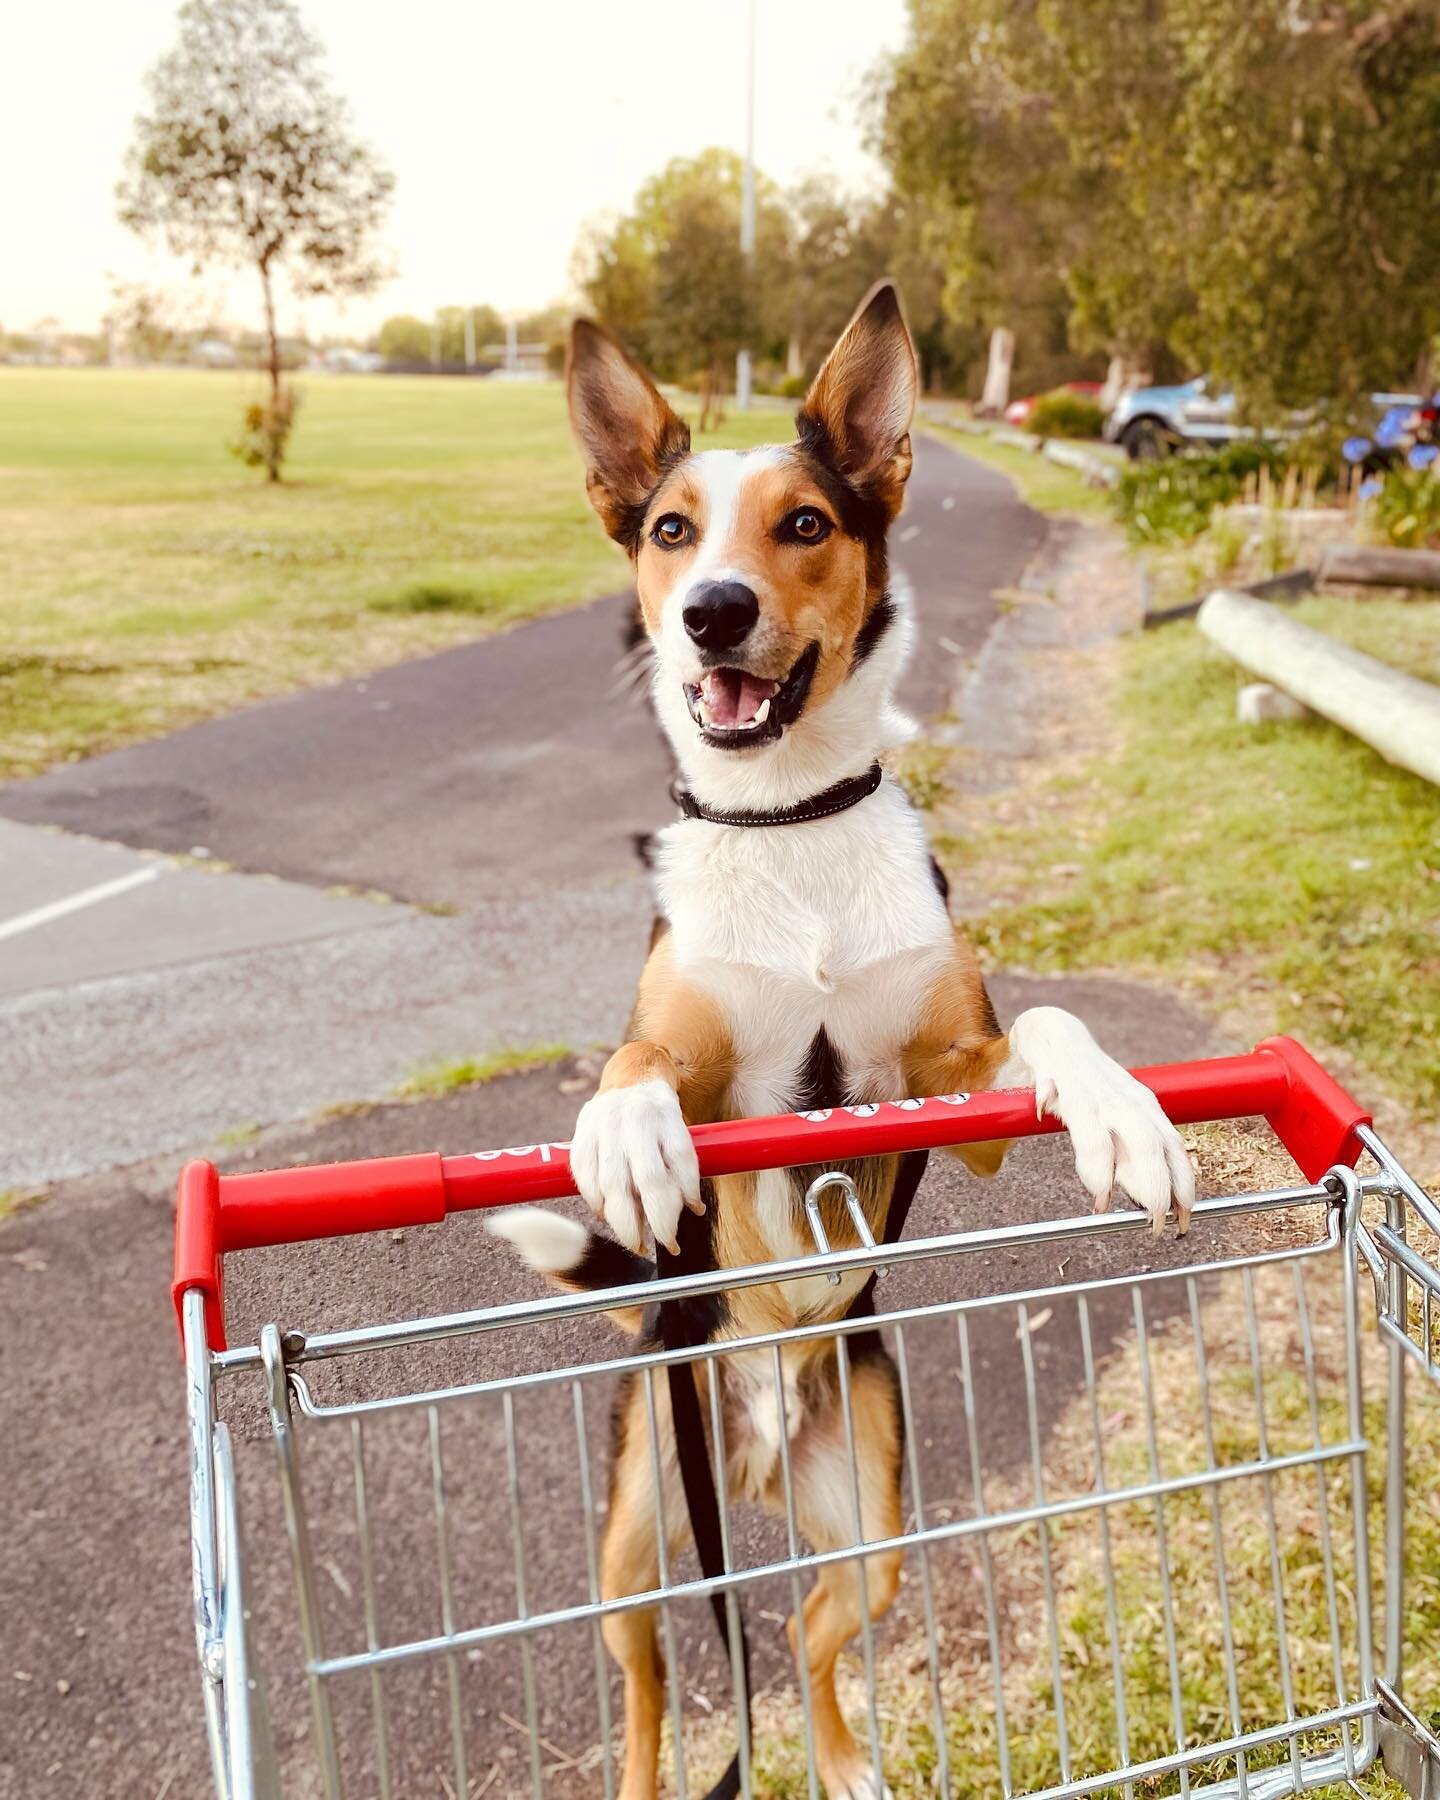 I like to play with the environment when on walk! Always way to have fun and boost your dog confidence by challenging him with little games ! 
Today we found a trolley, Bow was a little scared of it at first so we played around it, and look at him! H